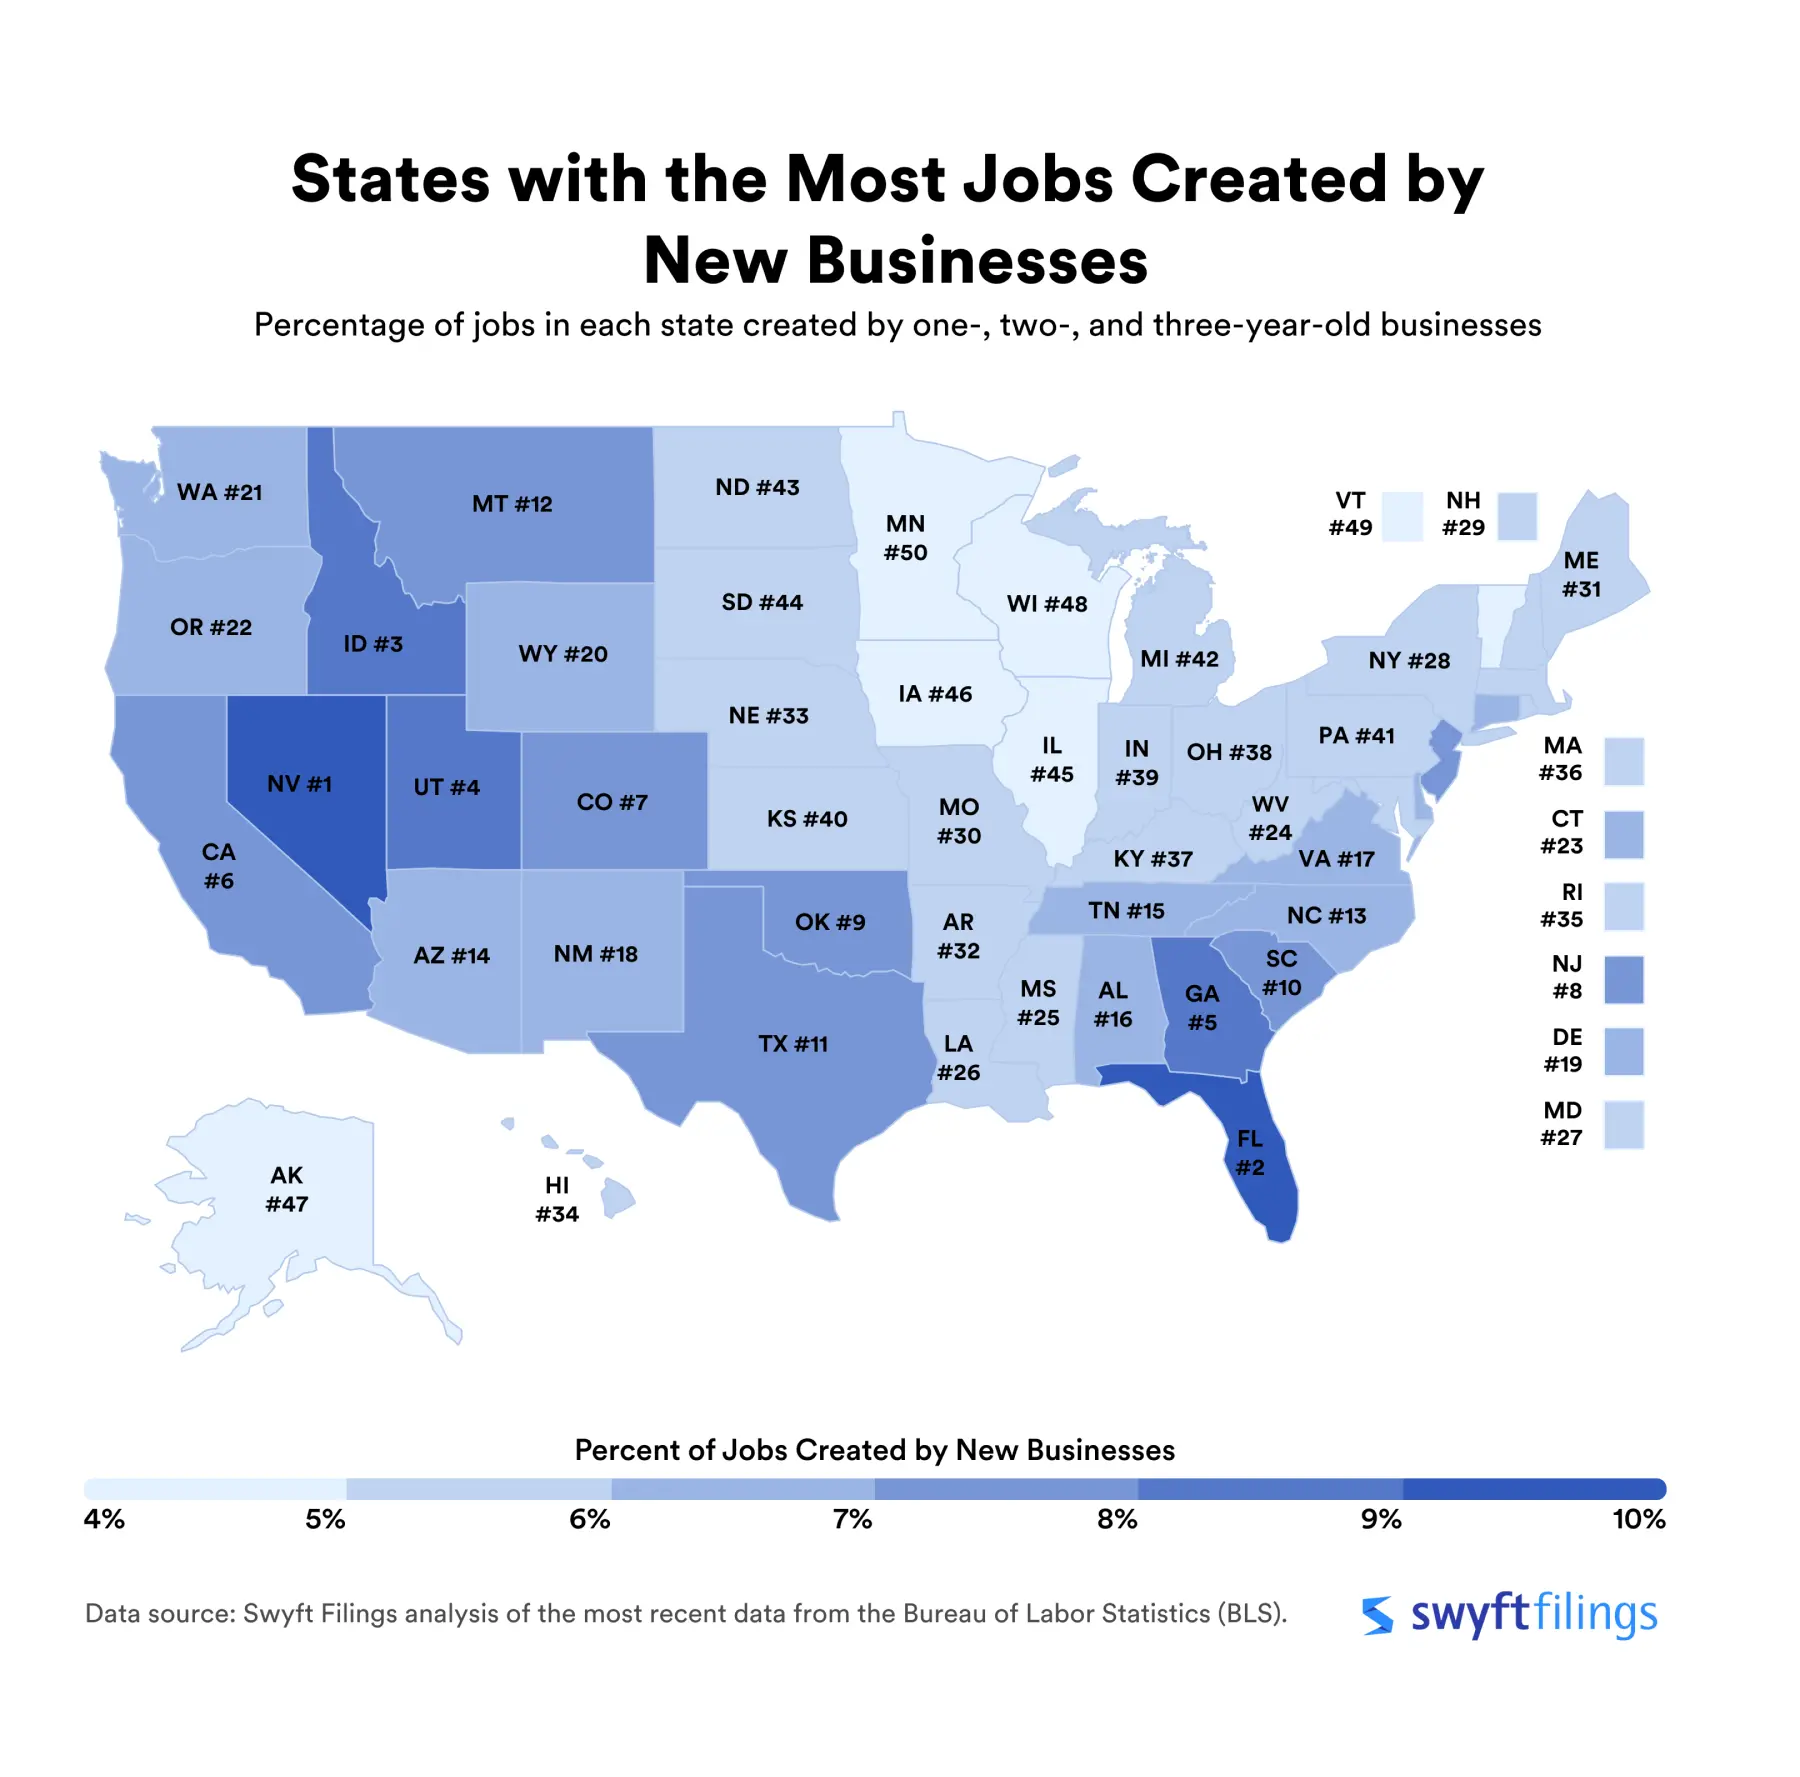 heat map of the united states depicting the states with the highest share of jobs created by new businesses